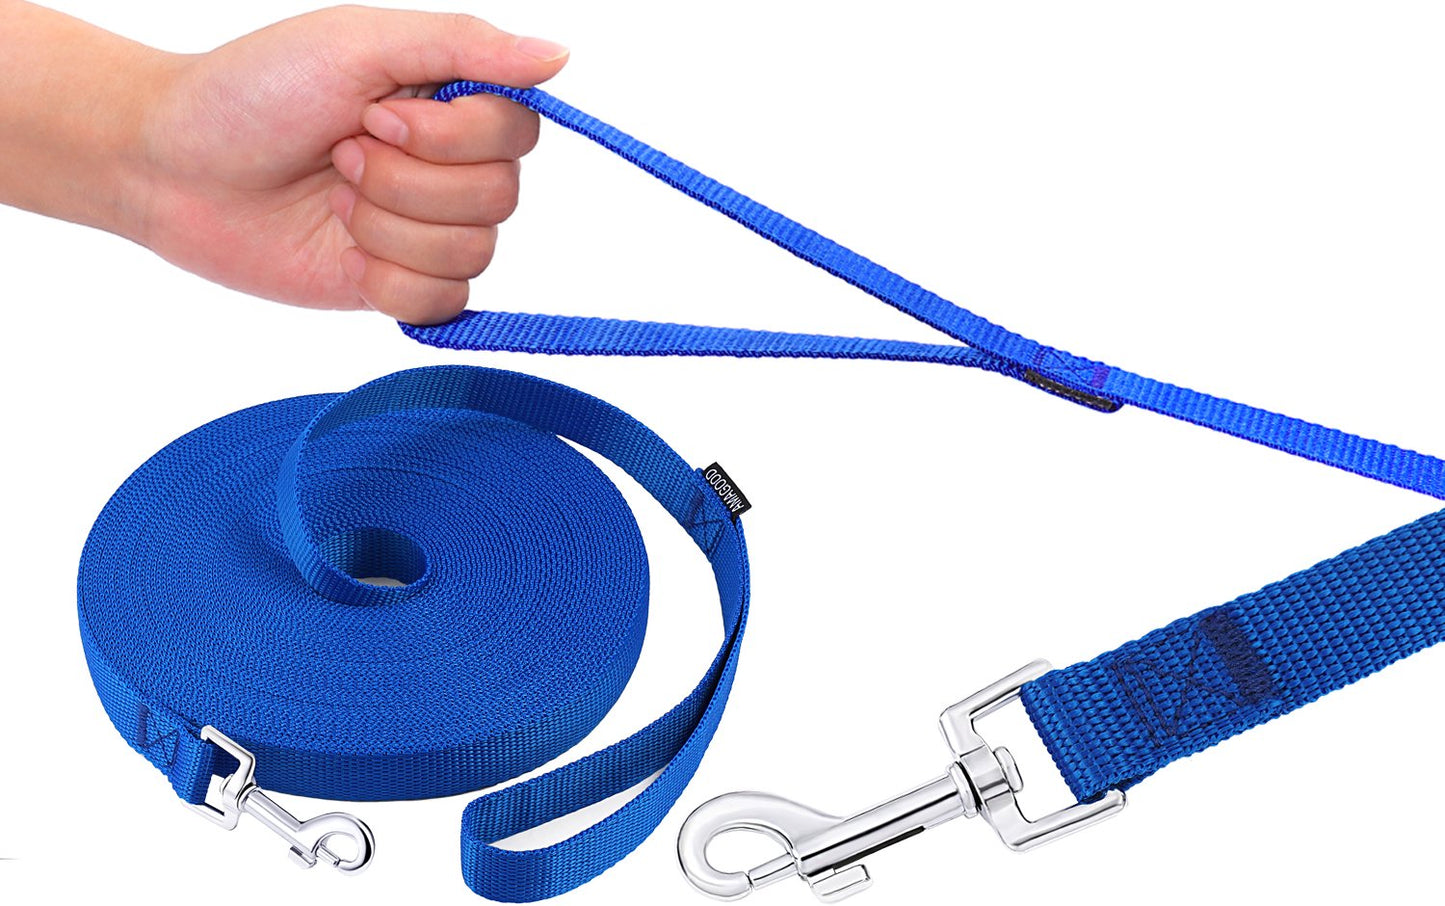 Amagood Dog/Puppy Obedience Recall Training Agility Lead-15 Ft 20 Ft 30 Ft 50 Ft Long Leash-For Dog Training,Recall,Play,Safety,Camping(15 Feet, Blue)